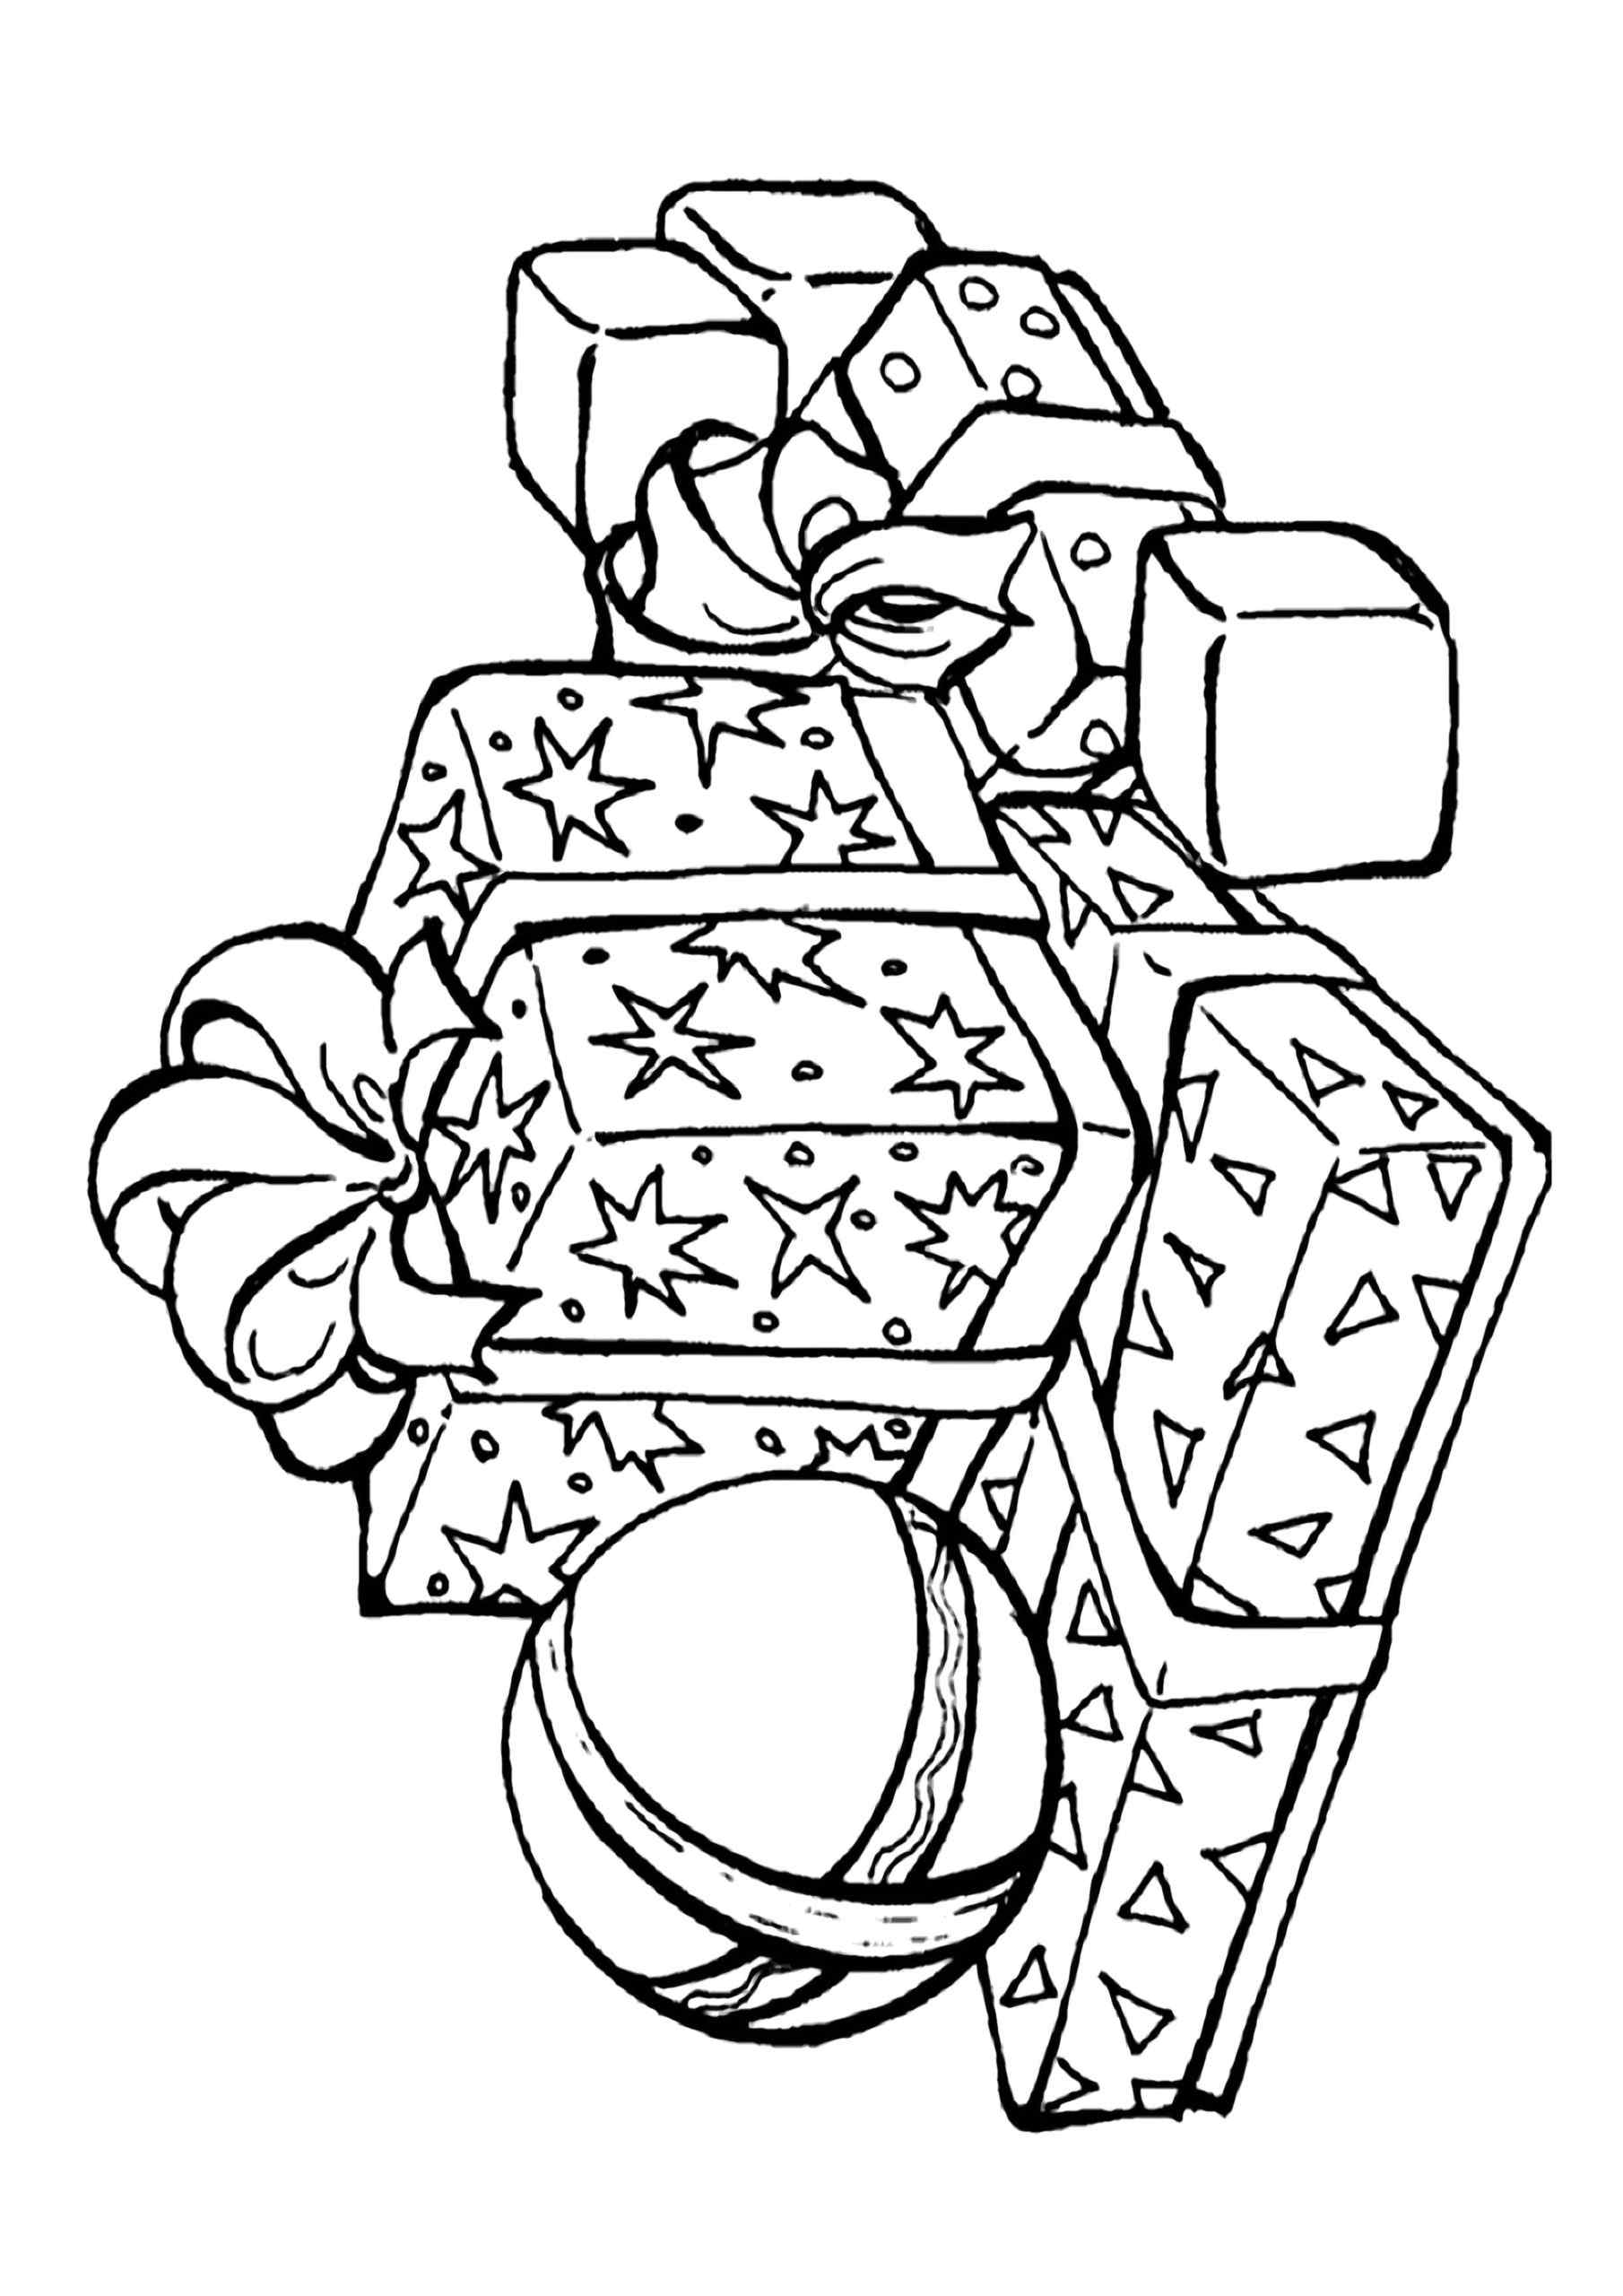 Long Awaited Gifts For The New Year Coloring Page